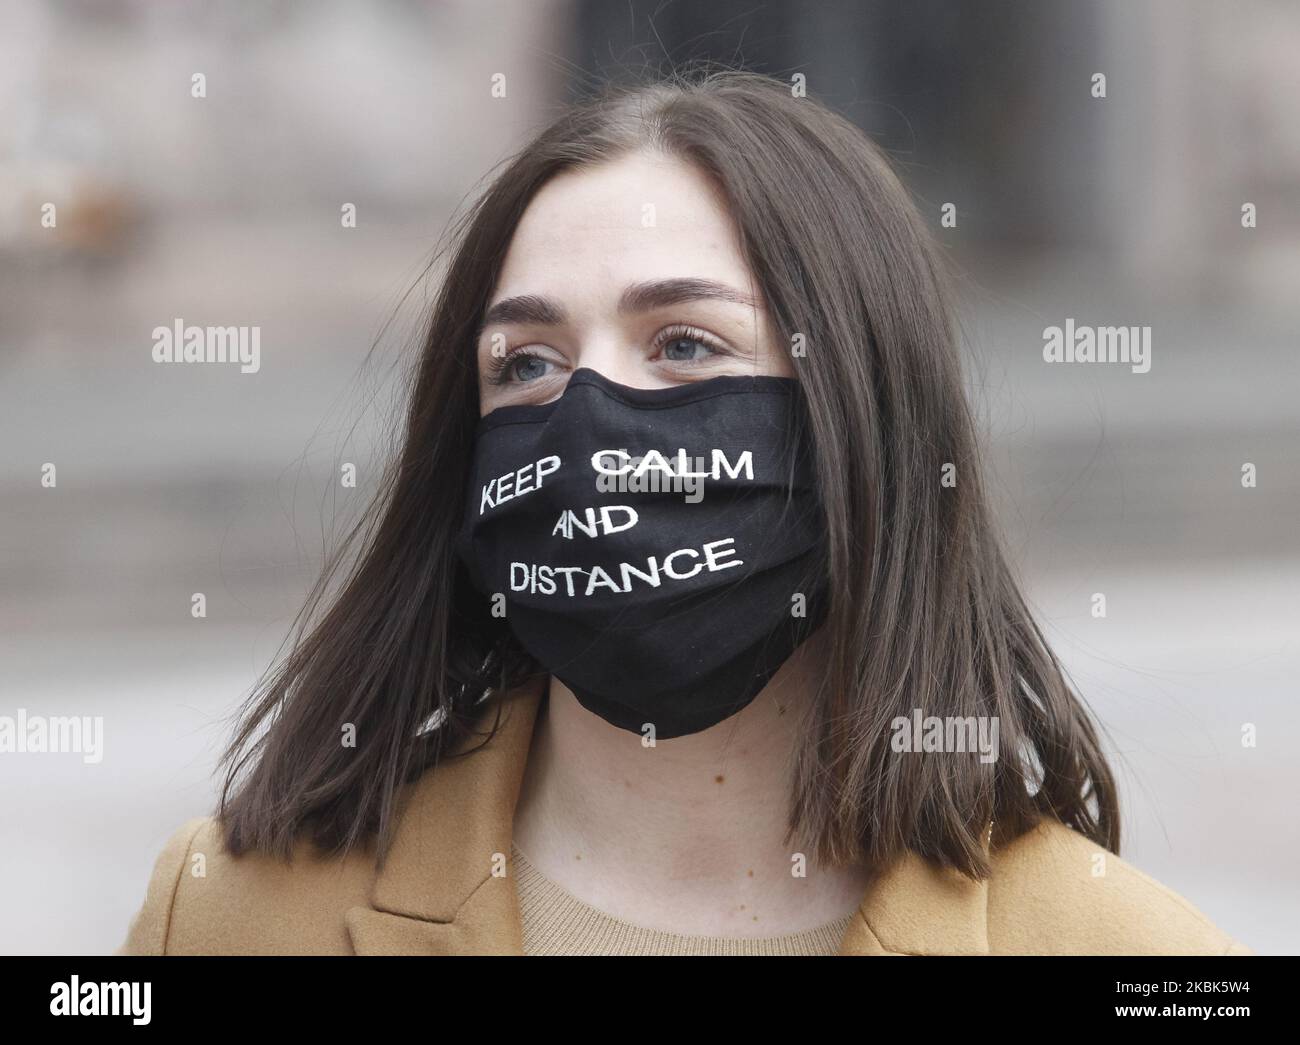 An young woman wearing a protective face mask as a preventive measure against the COVID-19 coronavirus walks in Kyiv, Ukraine, on 17 March, 2020. To stem the spread of the coronavirus COVID-19 from March 18, Ukraine suspends railway, air, bus intercity and interregional passenger traffic inside the country, and from March 17 the subway stops working in cities, bars, restaurants, cafes, shopping and entertainment centers temporarily suspend their work in Ukraine. (Photo by STR/NurPhoto) Stock Photo